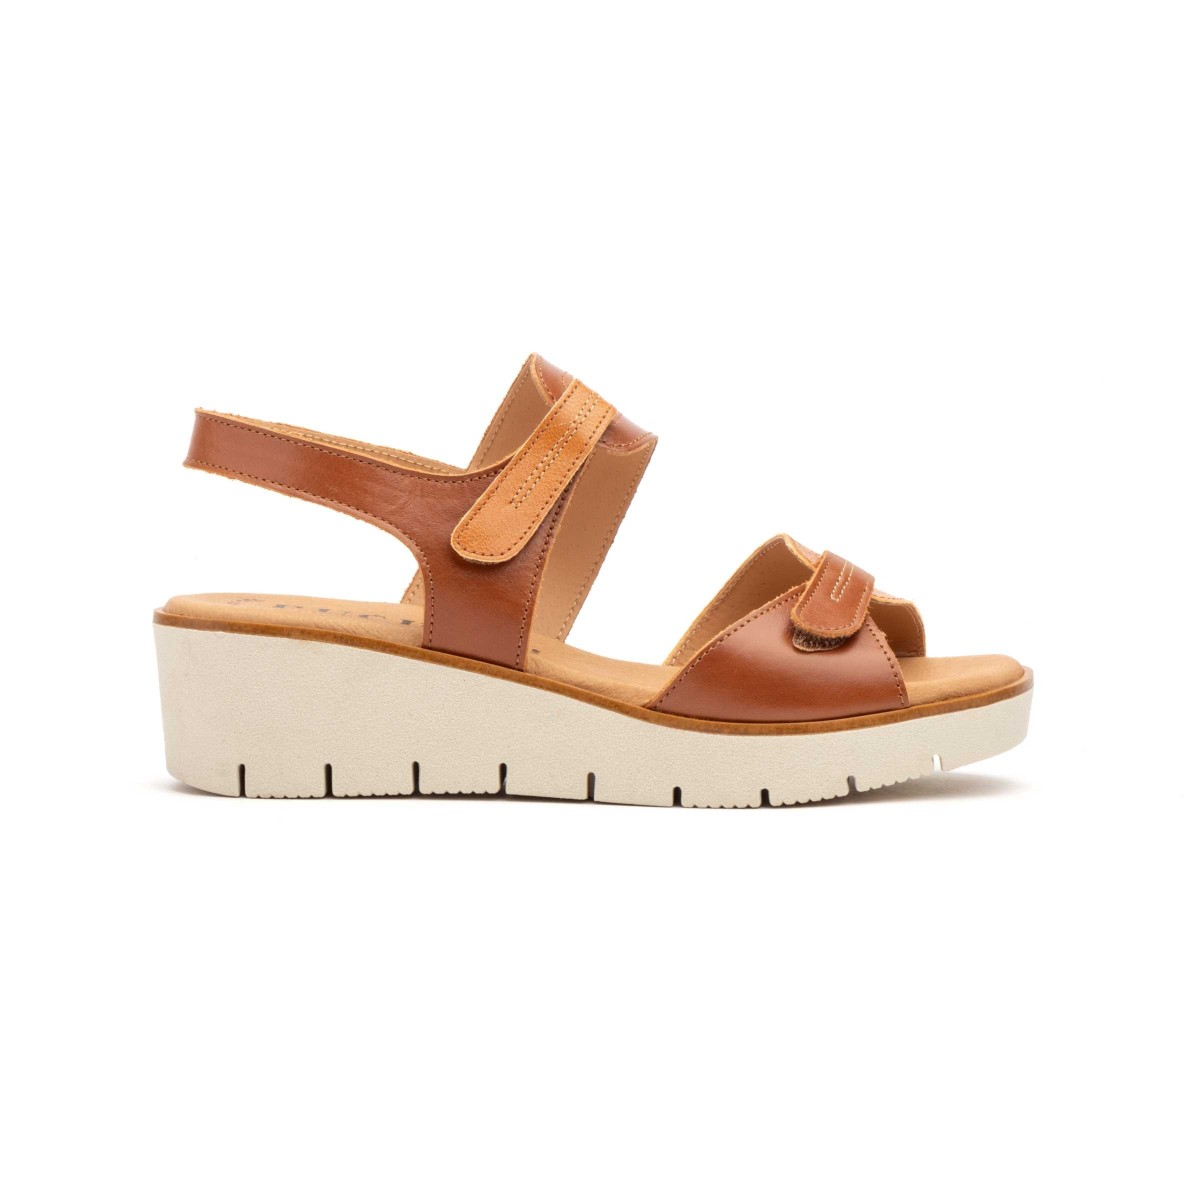 Brown leather wedge sandals by CBP